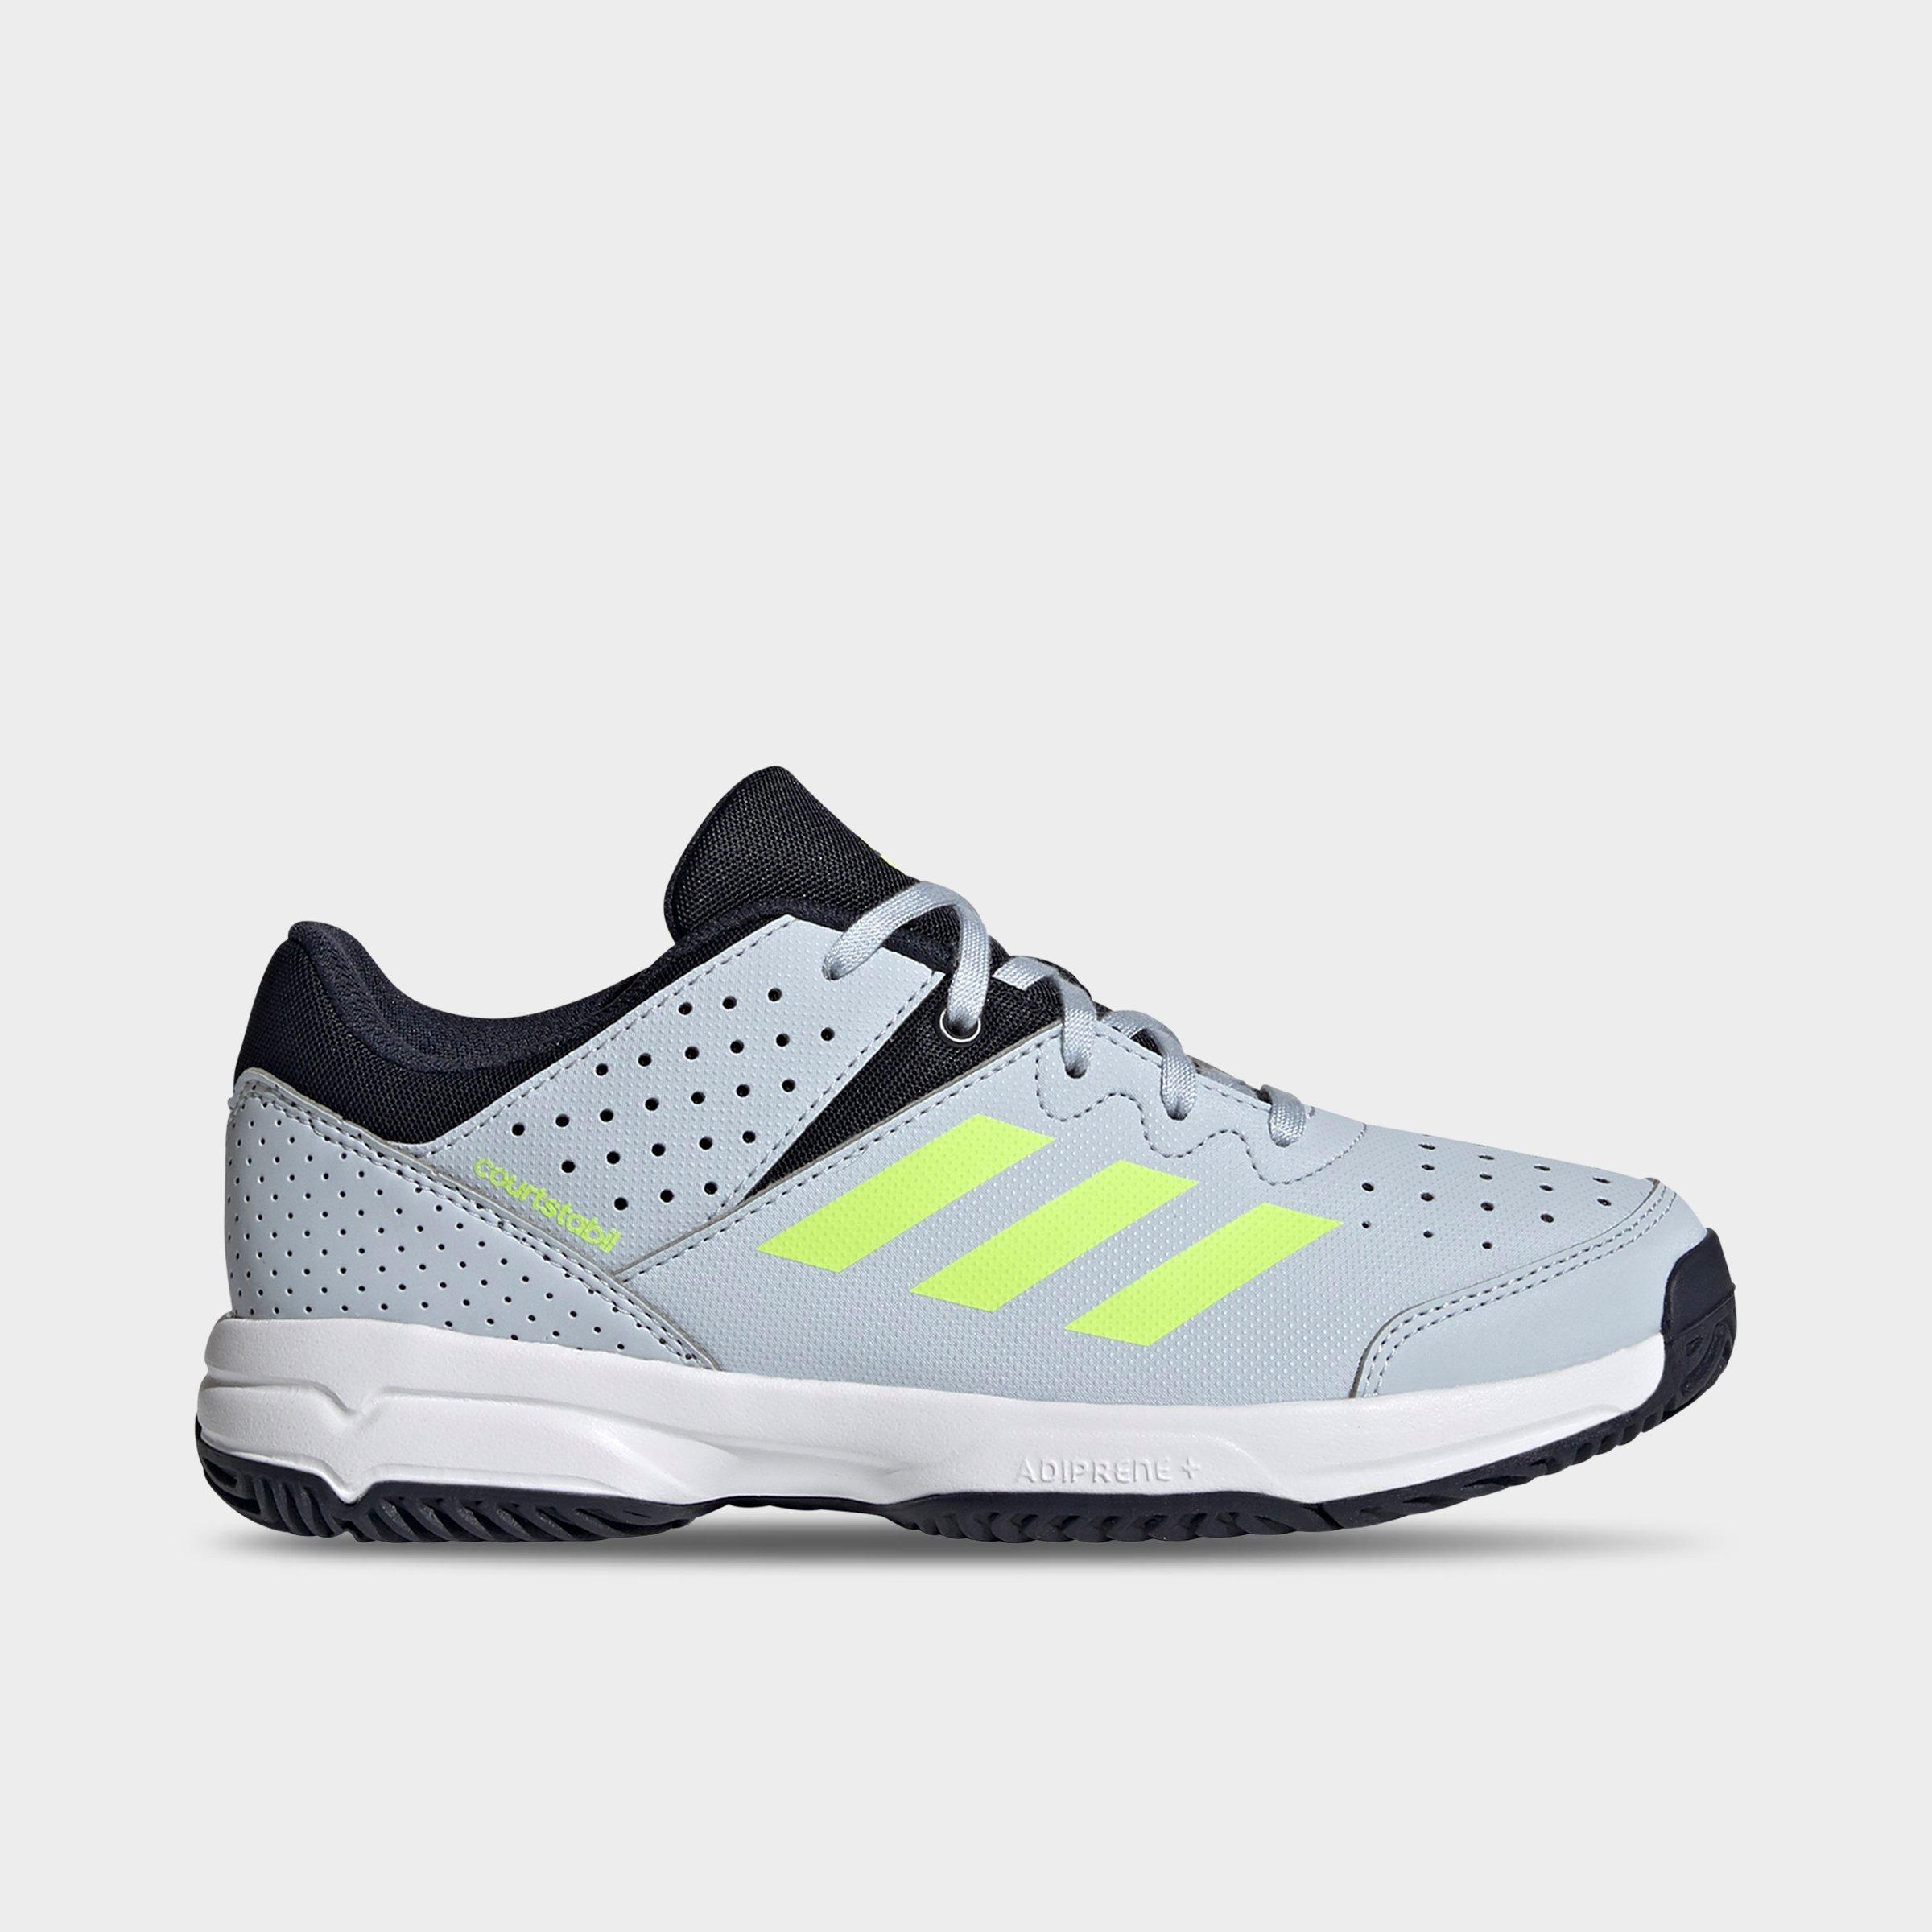 adidas shoes for kids online